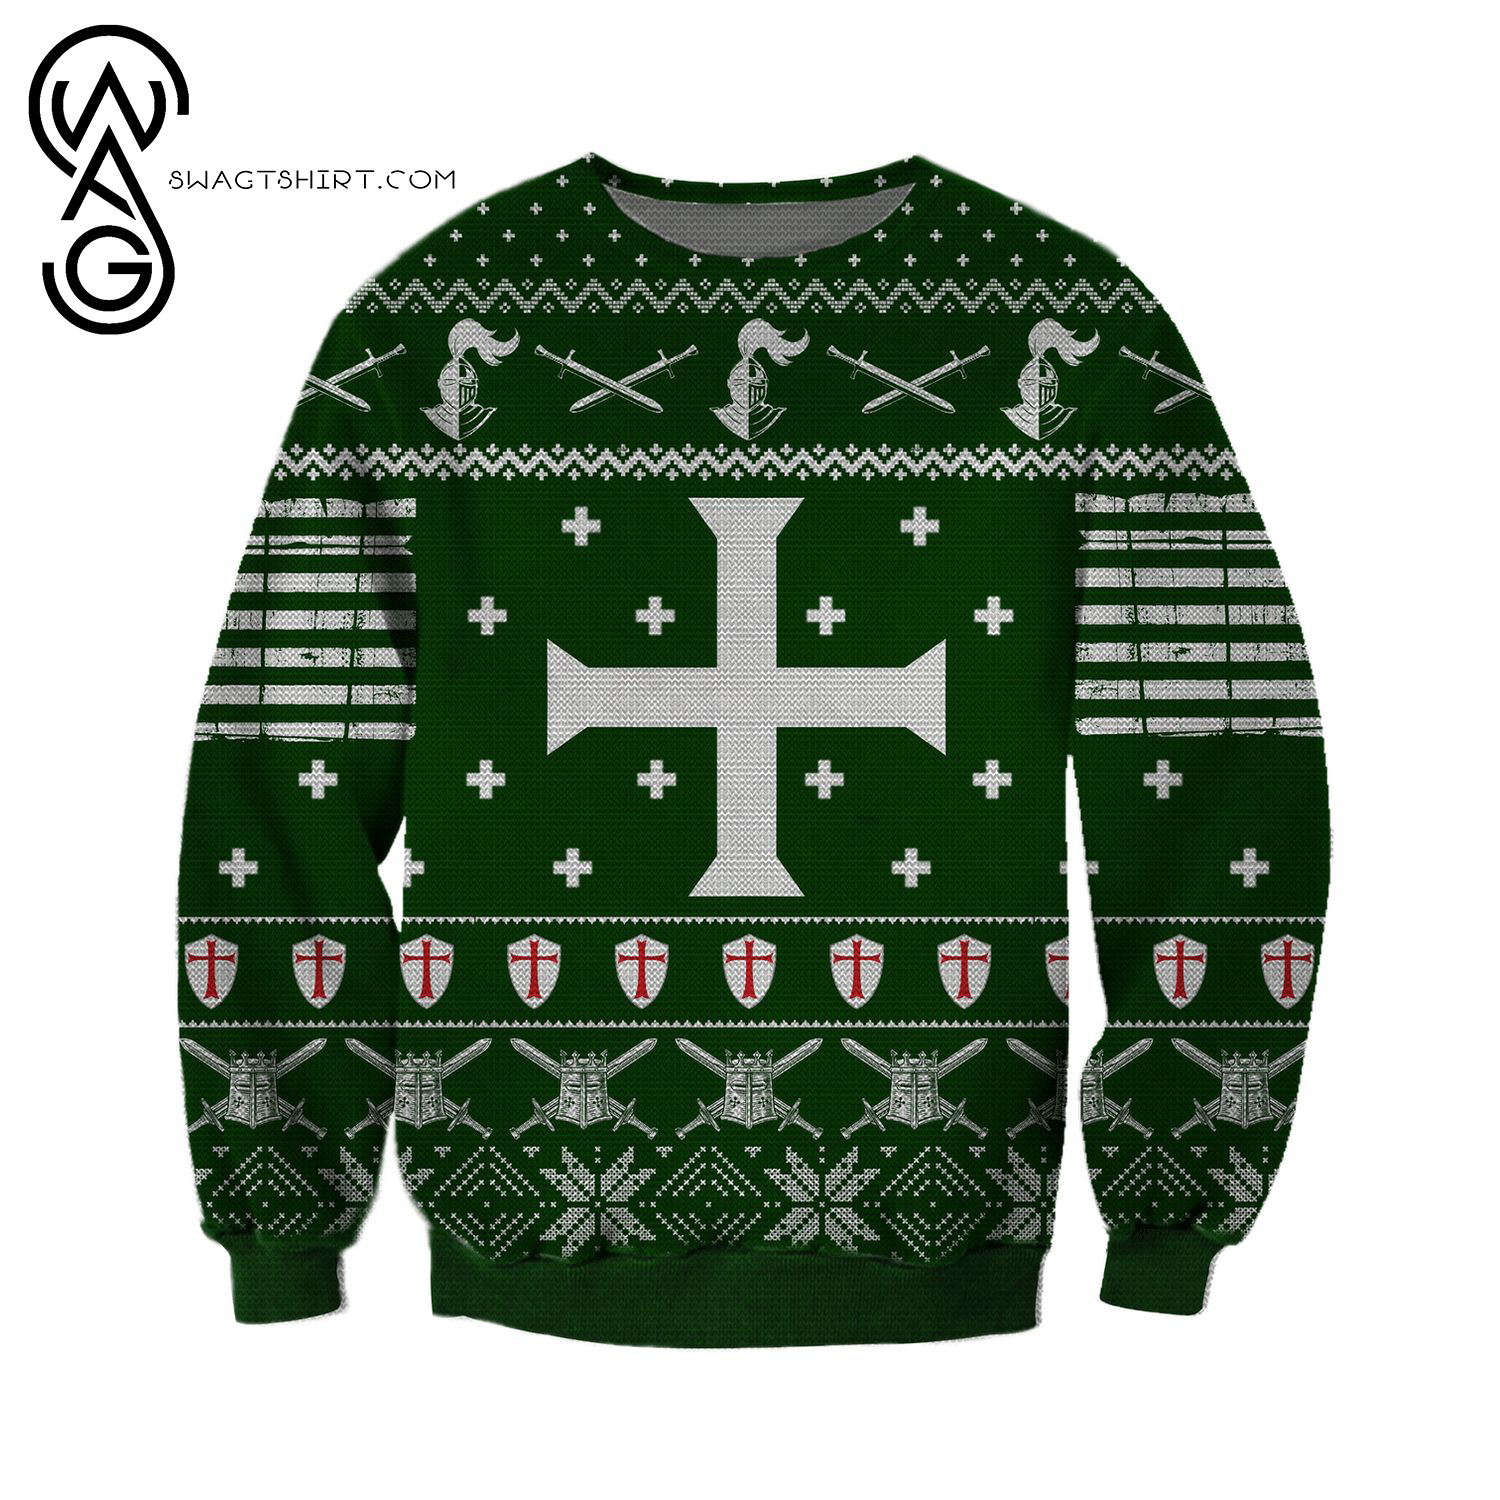 The Knights Templar Full Print Ugly Christmas Sweater